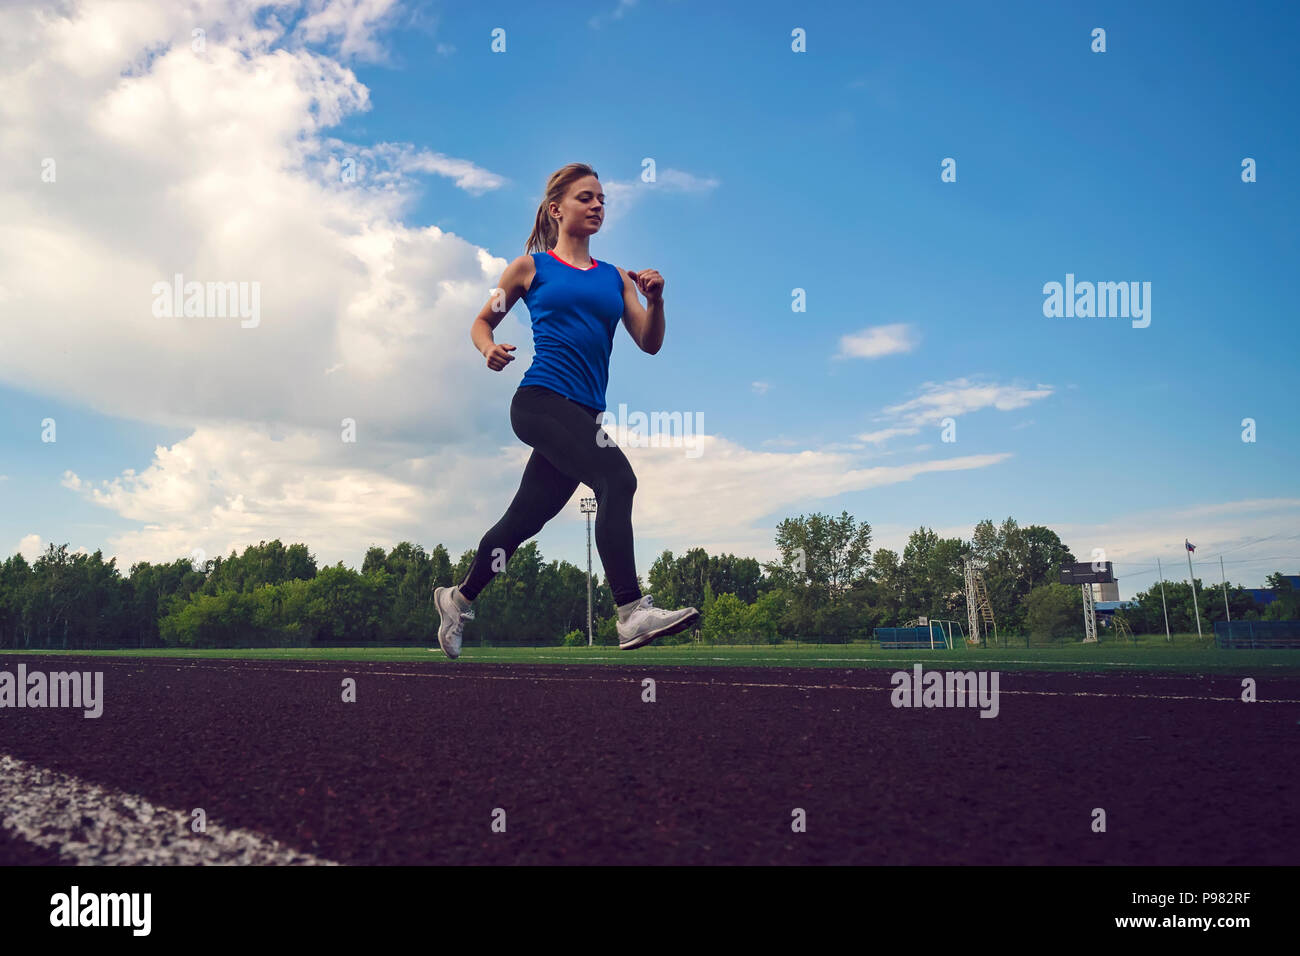 Young woman running during sunny evening on stadium track. A blonde in a blue t-shirt and black leggings runs across the stadium. Stock Photo